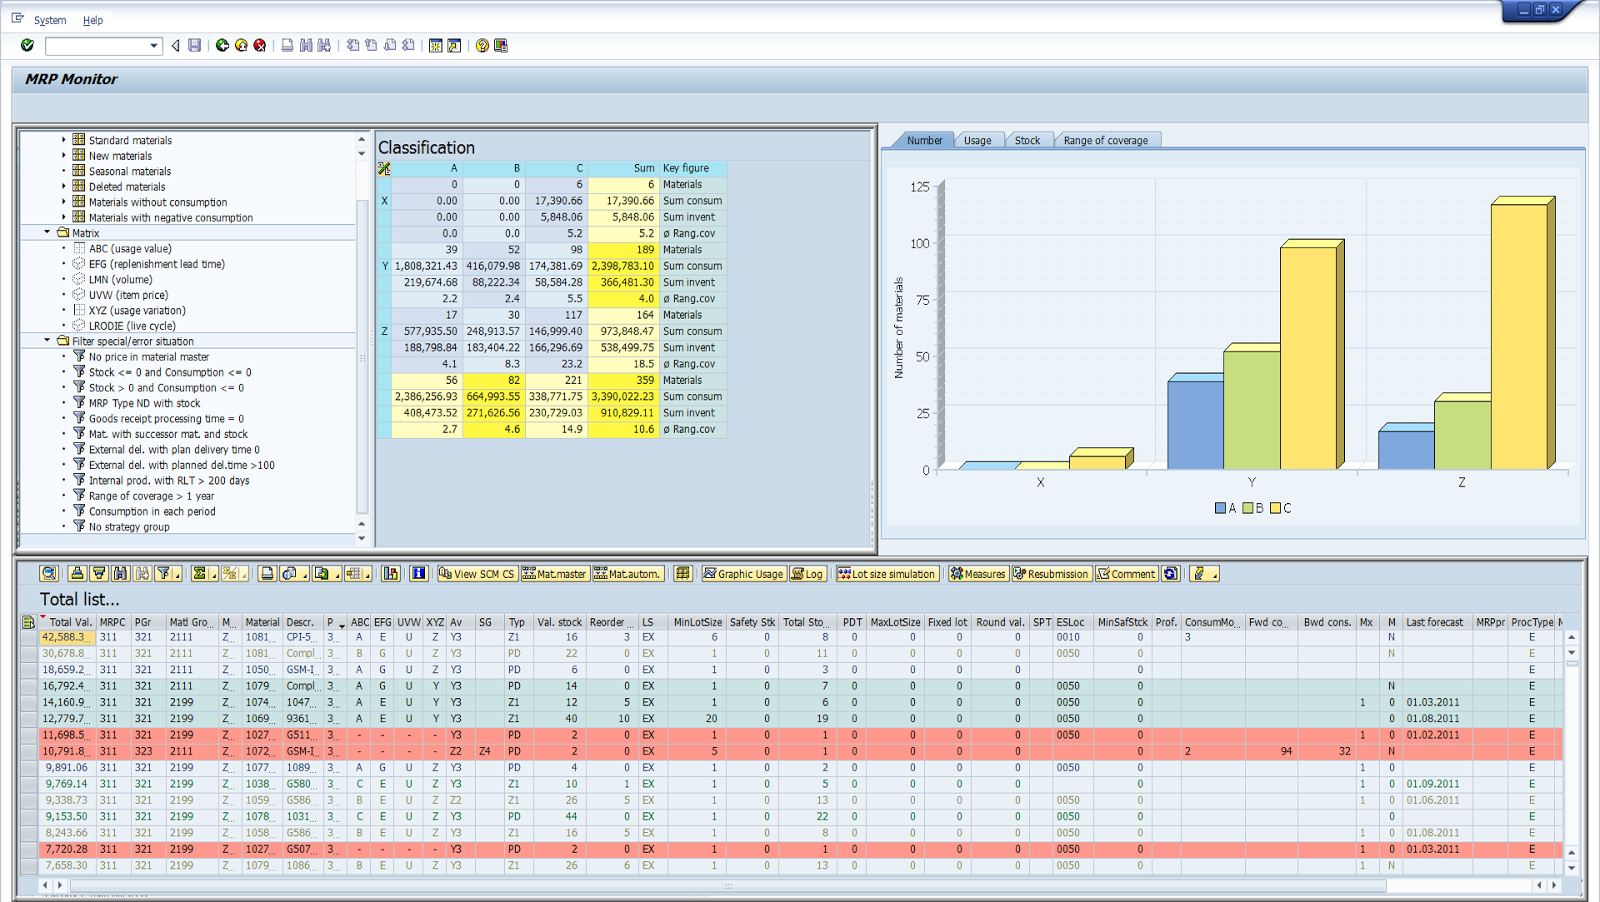 Views and Ideas of a traveling SAP chain optimizer: Effective Materials Planning the Monitor